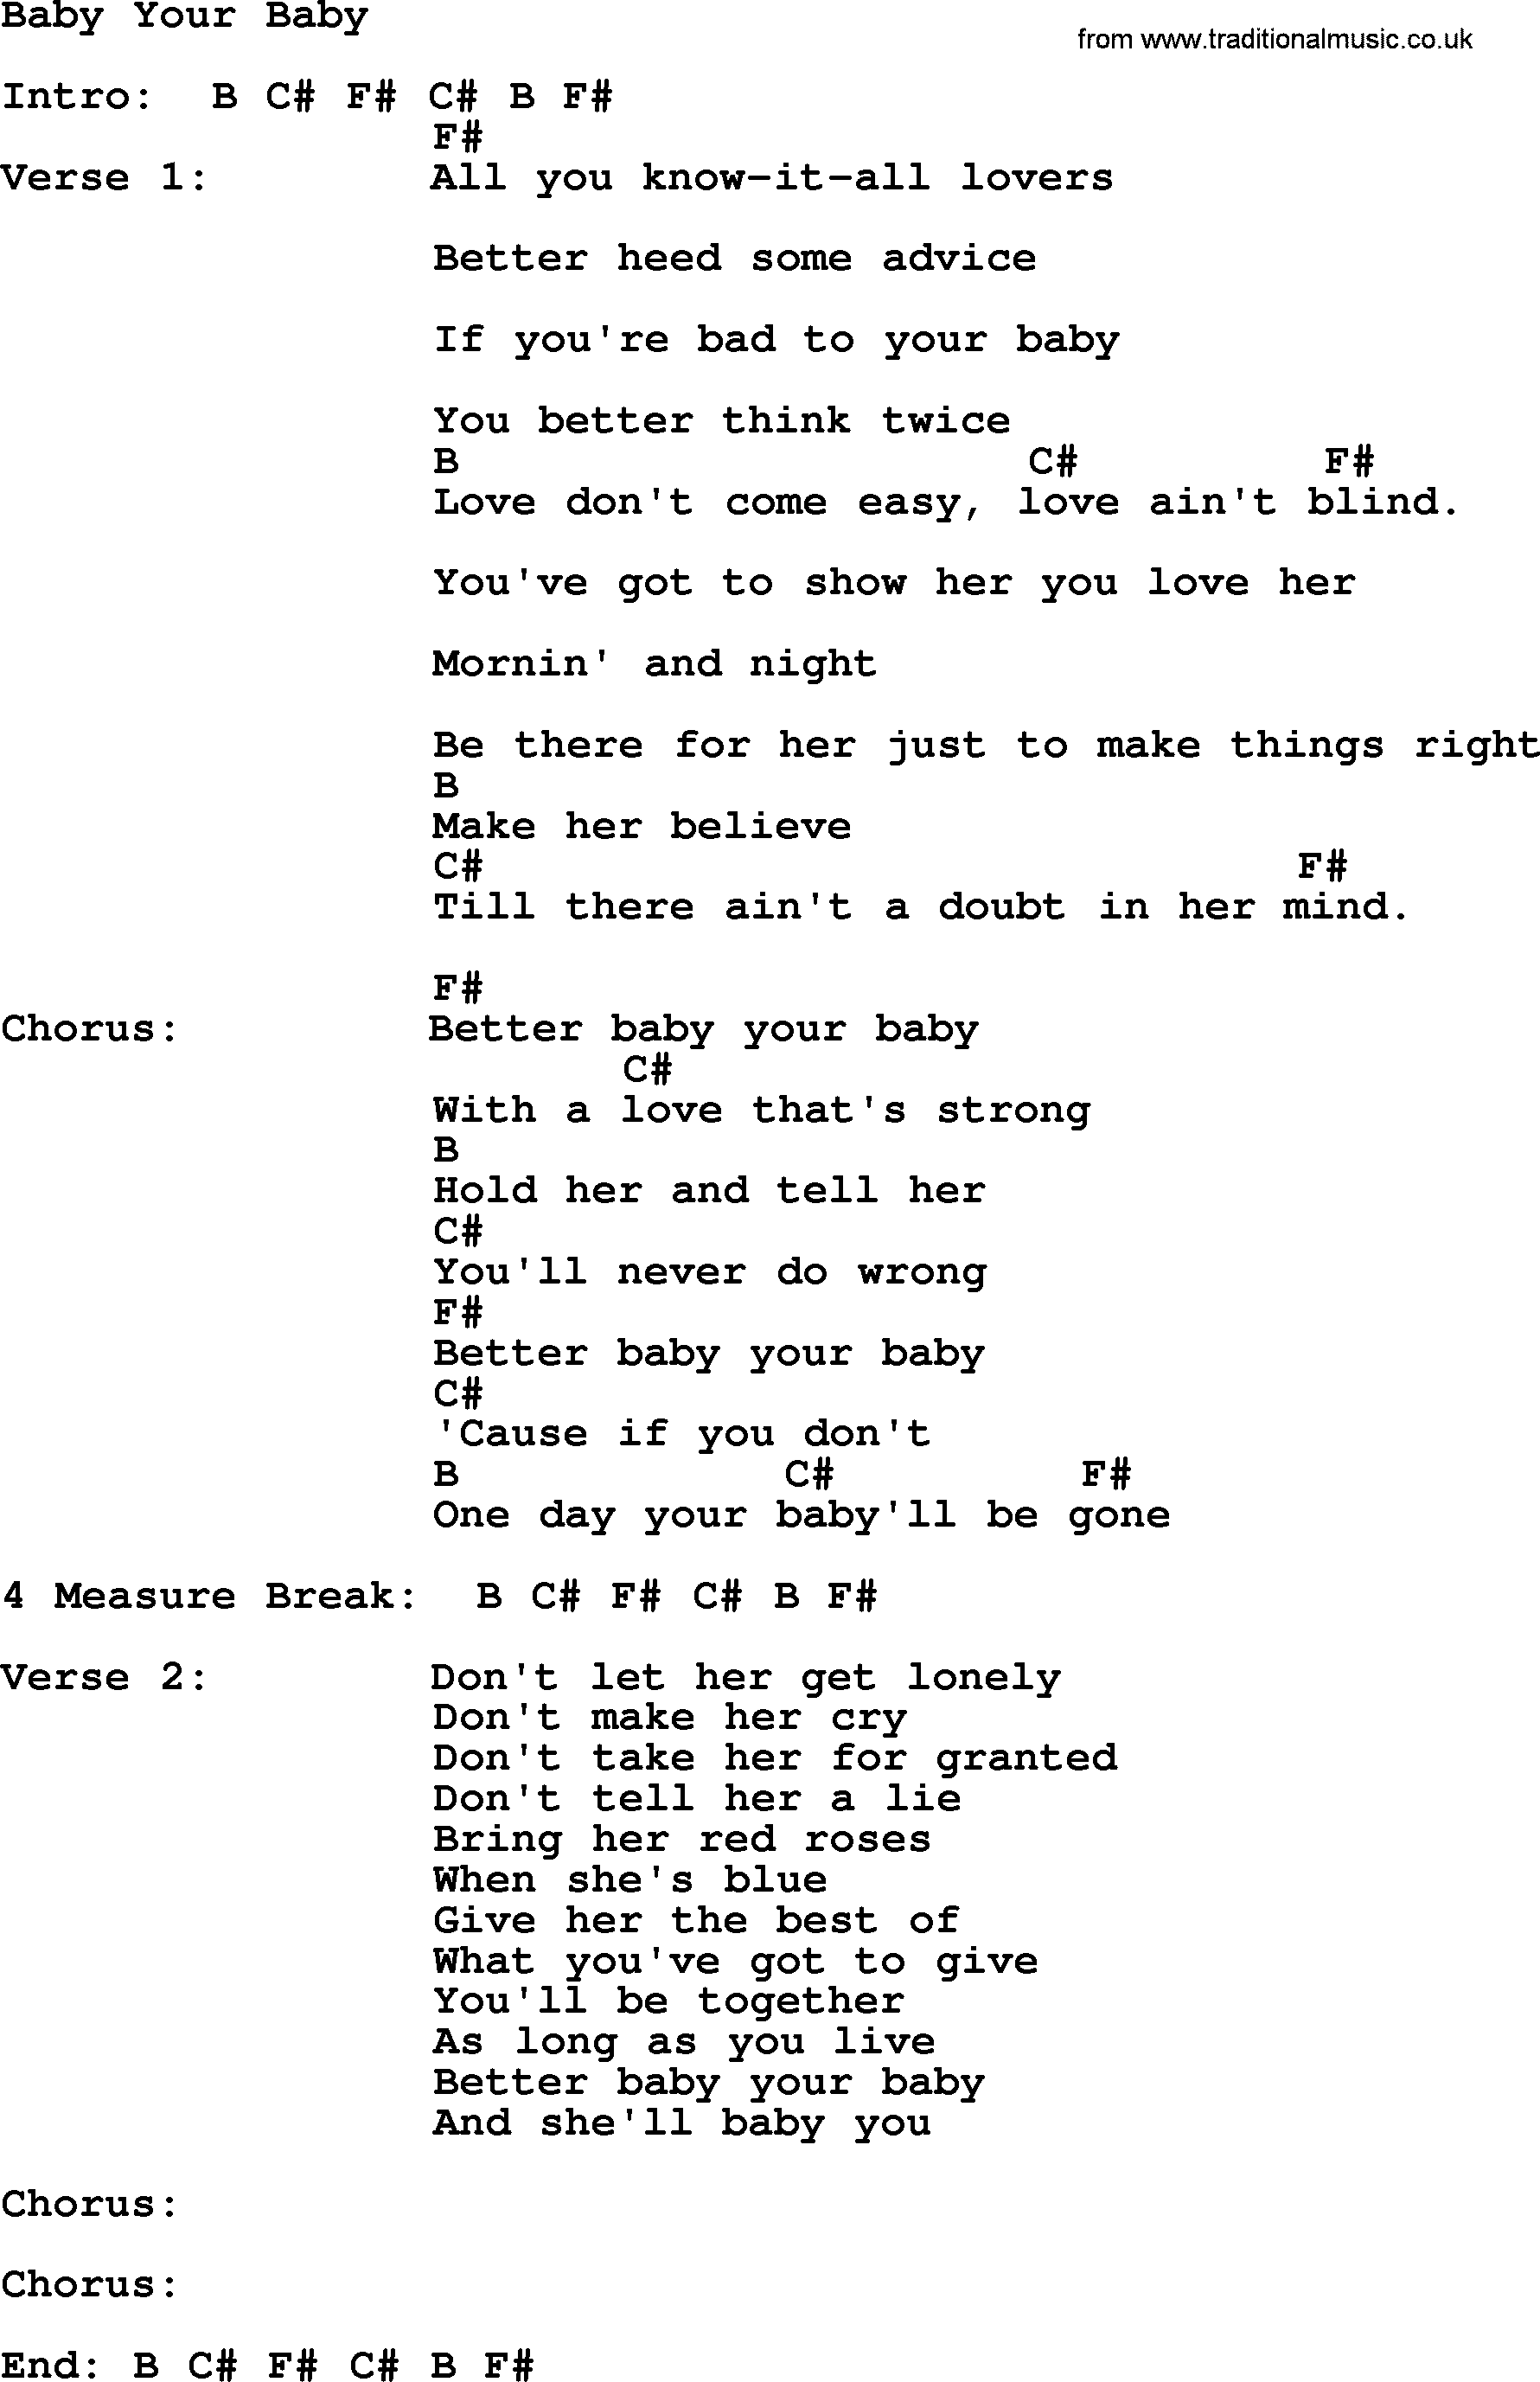 George Strait song: Baby Your Baby, lyrics and chords